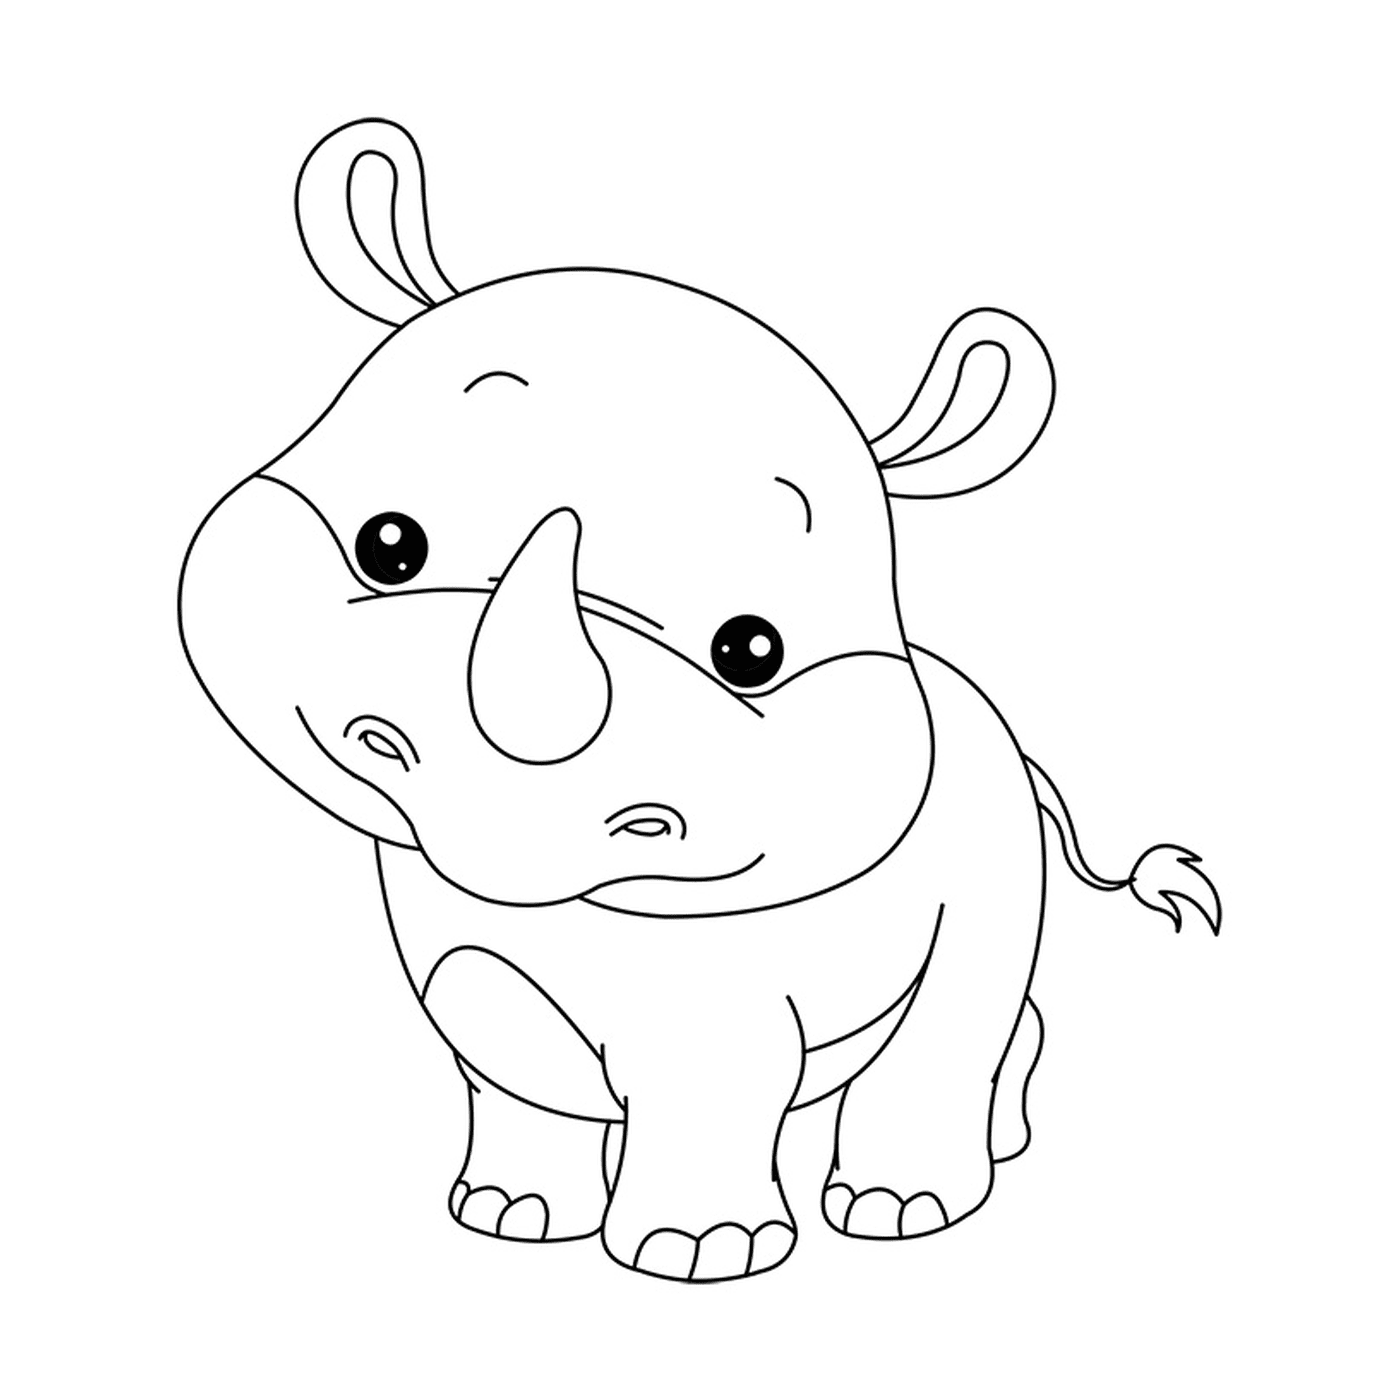  A rhinoceros looking at the camera 